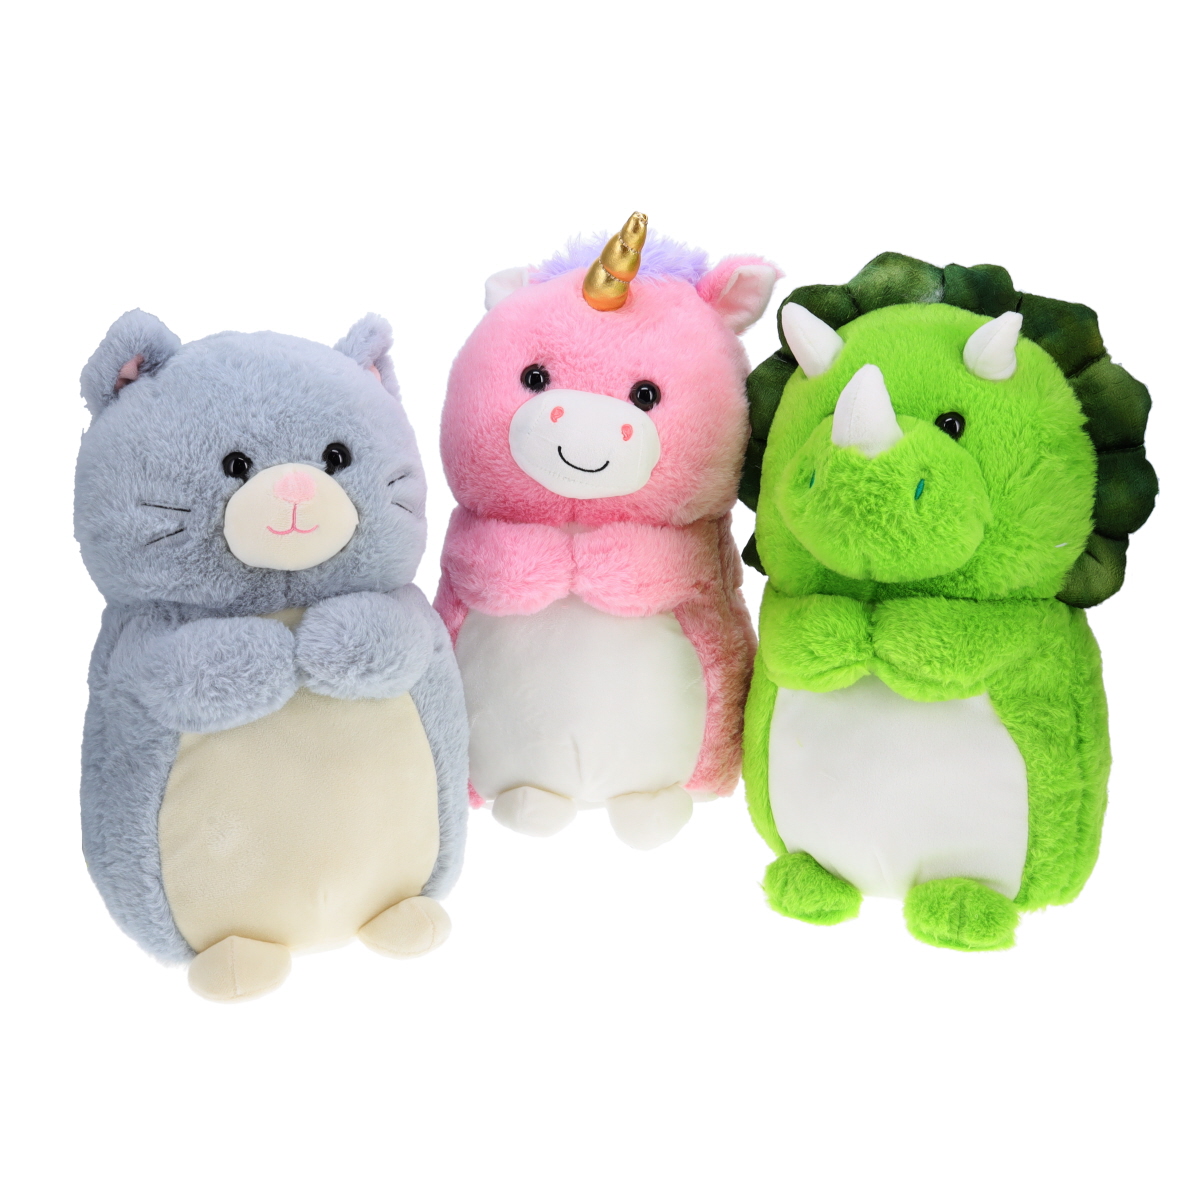 Treasure Cove K1843813 13-Inch Chubby Animal Plush Assortment Round Stuffed Animal Toys Gifts for Kids Assorted